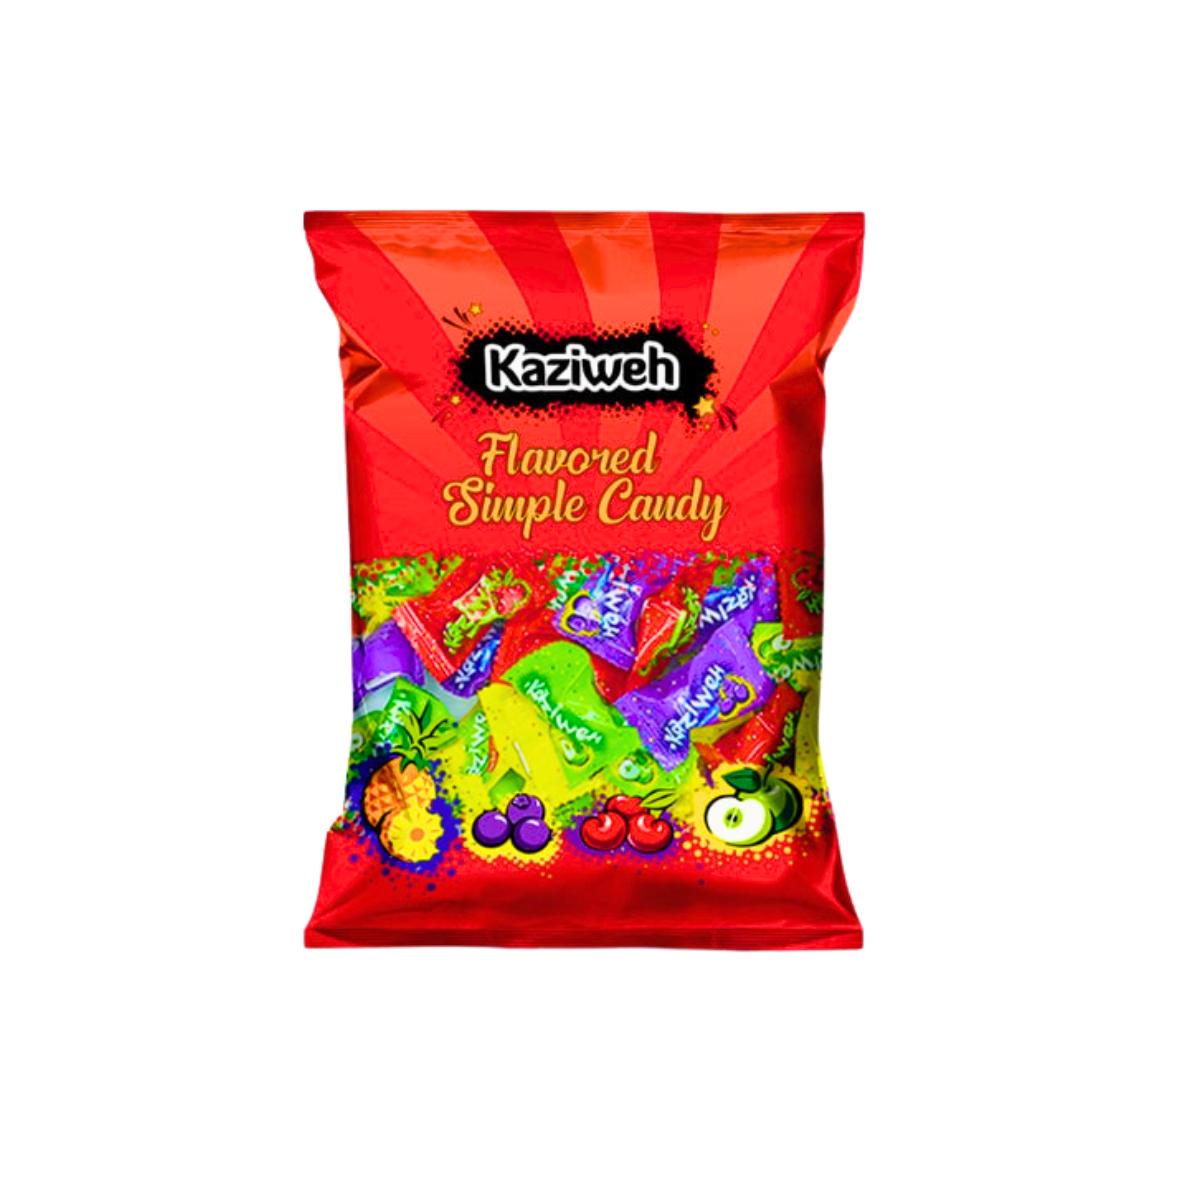 Kaziweh Flavored Simple Candy 900g